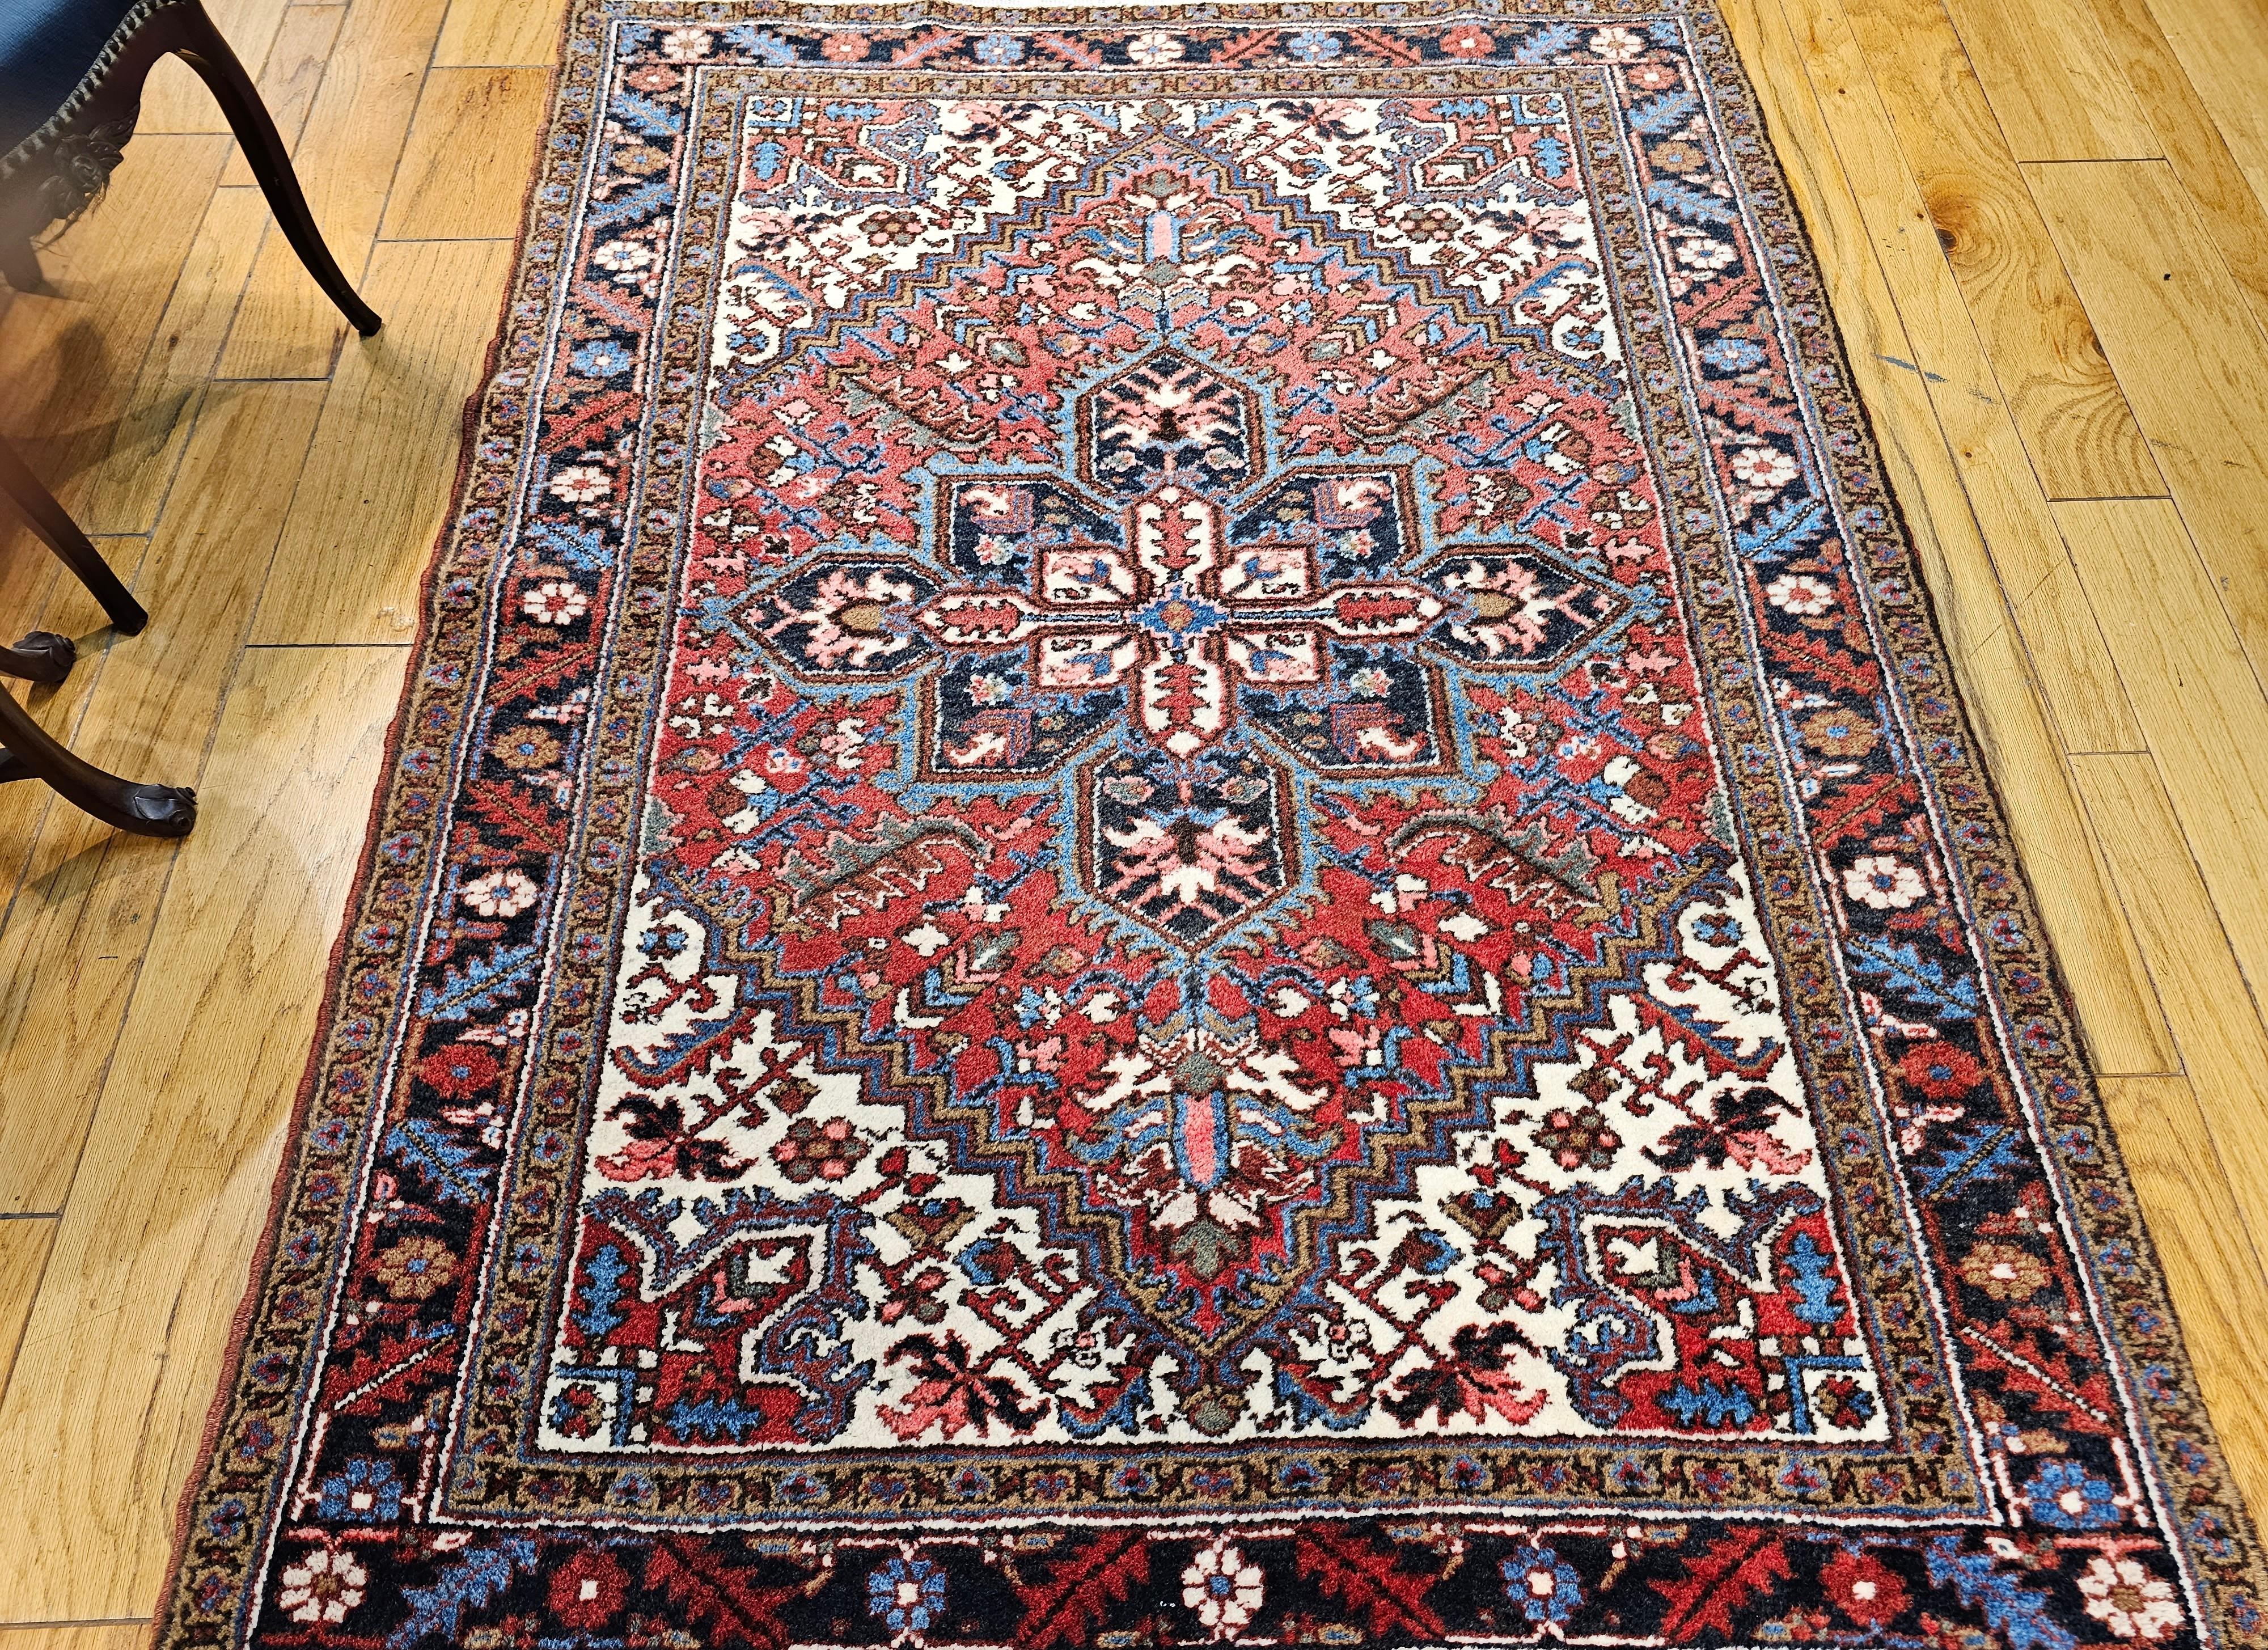  Vintage Persian Heriz area rug in a medallion pattern from the 2nd quarter of the 1900s. Beautiful geometric design set in a red and cream color field with a central medallion in navy blue.  The primary border is in navy blue with leaf designs in 